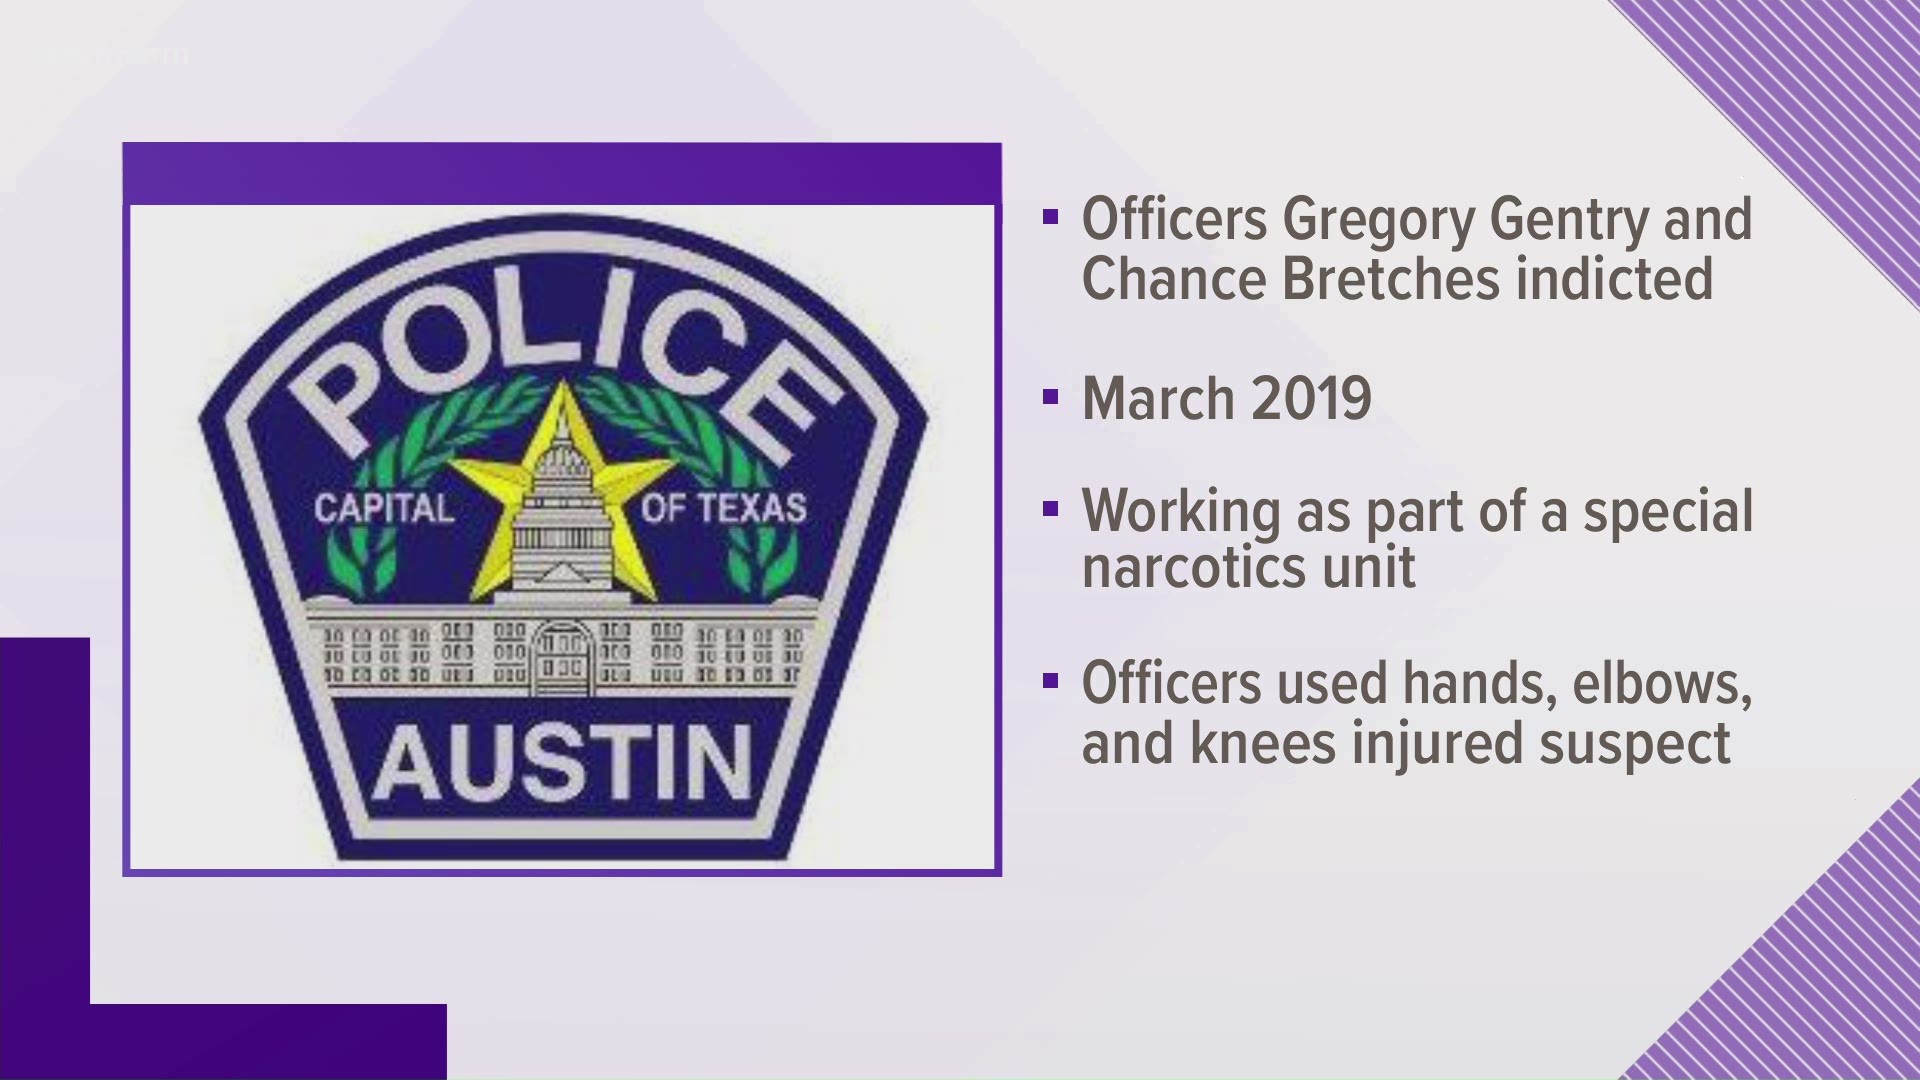 Two Austin police officers are facing assault charges for the violent arrest of a man in March 2019. They had previously been cleared of any wrongdoing.